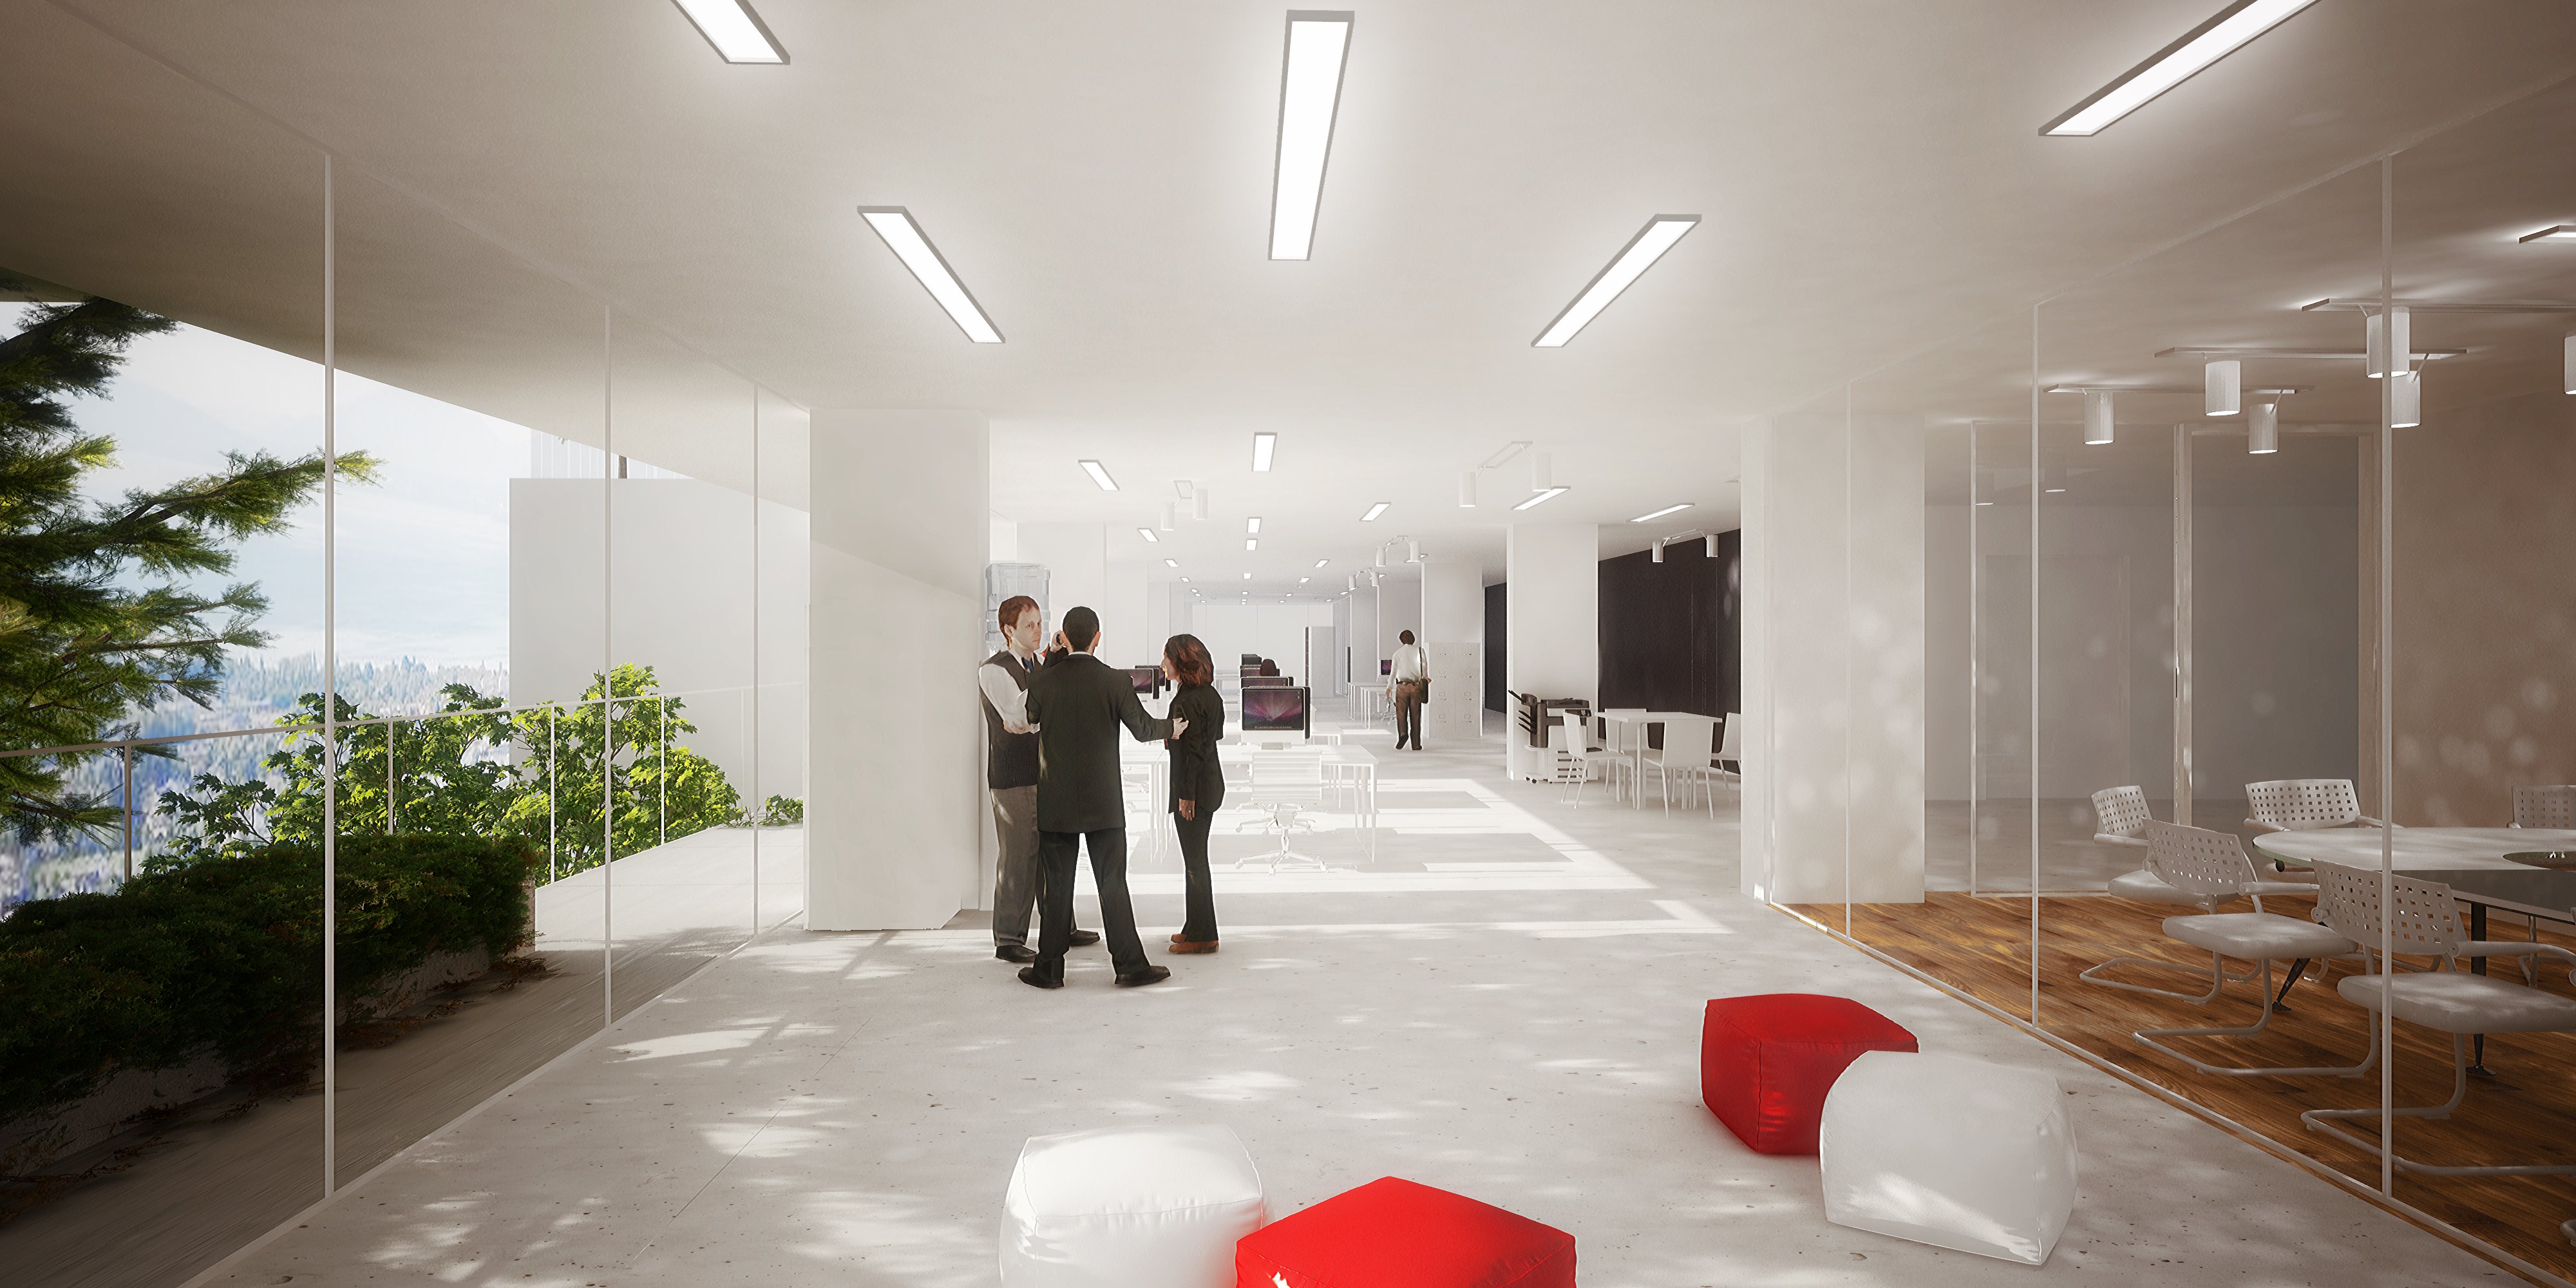 An office space rendering for the Tower of the Cedars project in Lausanne